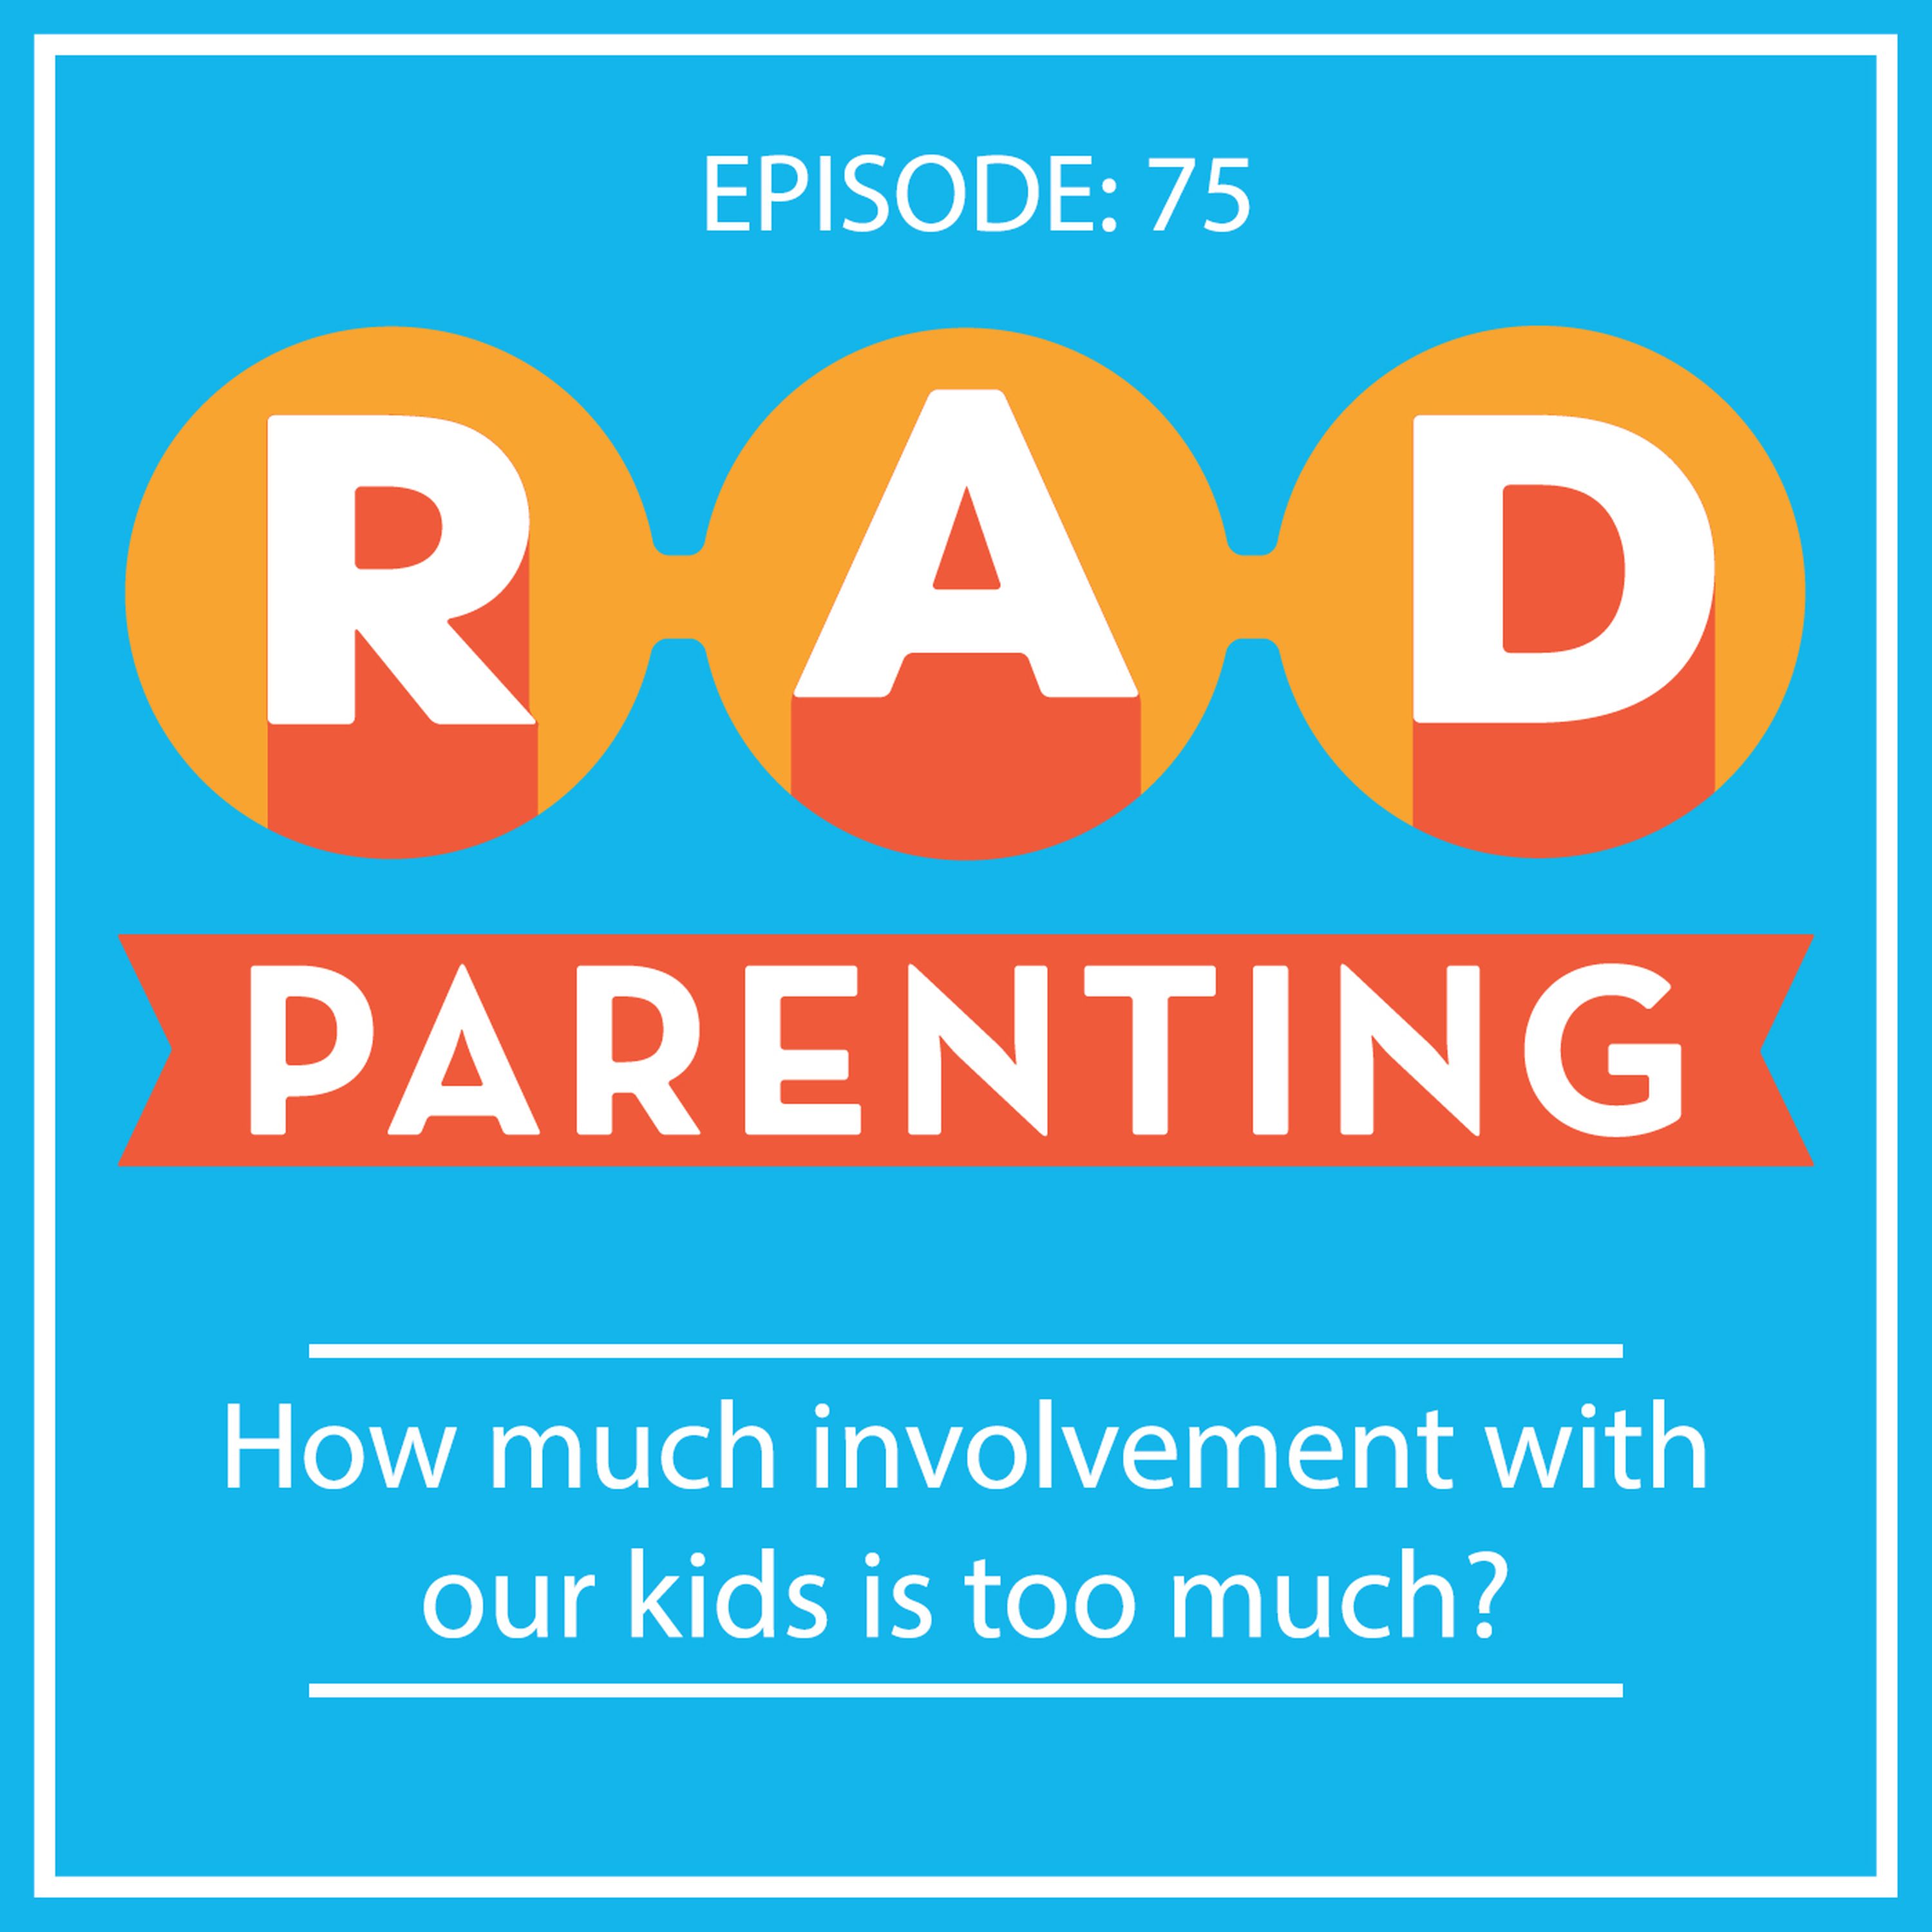 Episode 75: How much involvement with our kids is too much?